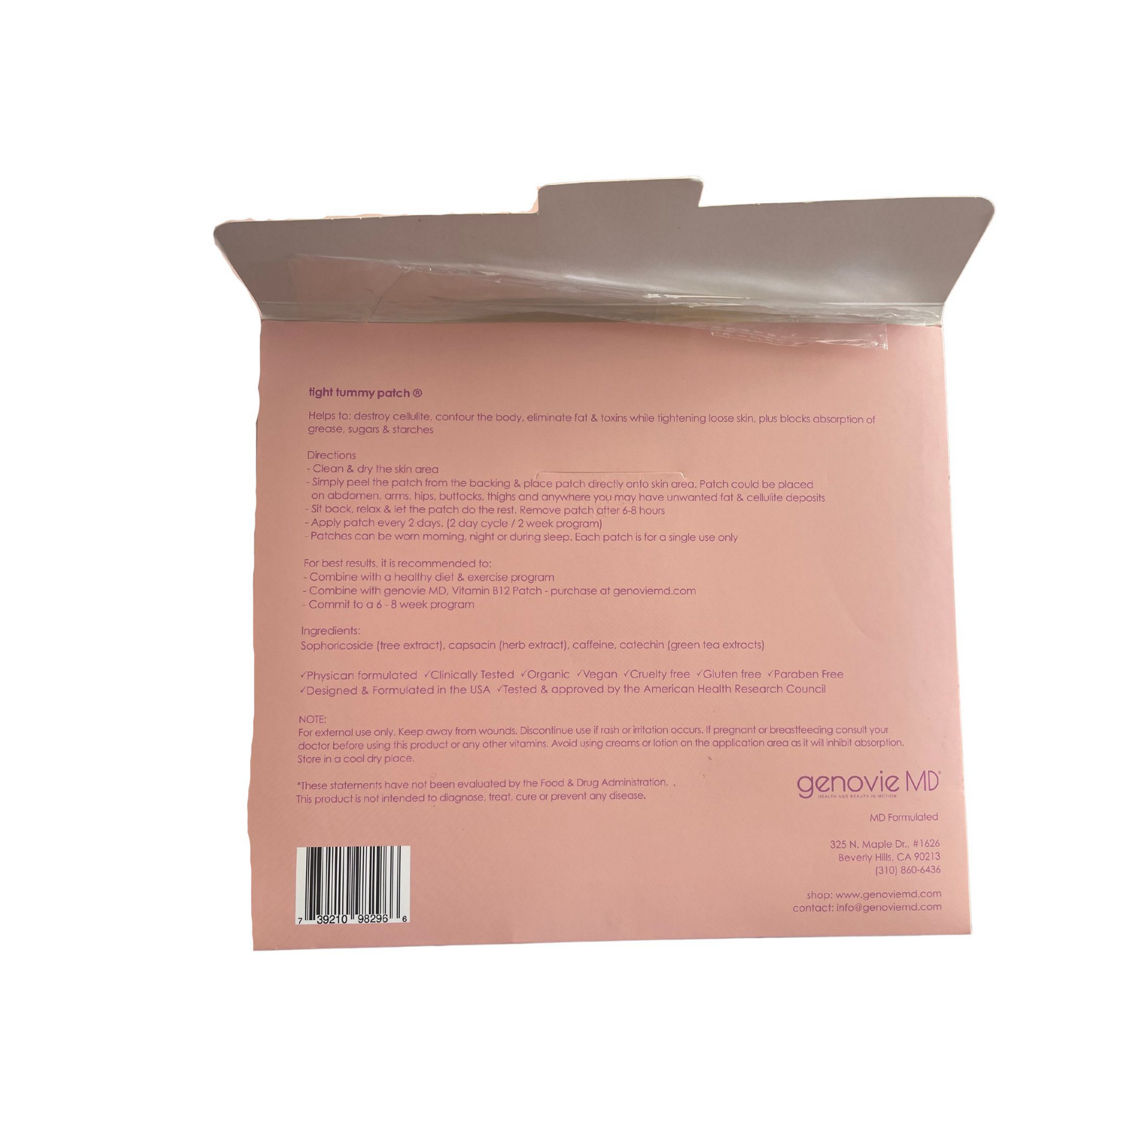 Genovie MD All Natural Tight Tummy Patch Applicator - Image 2 of 5